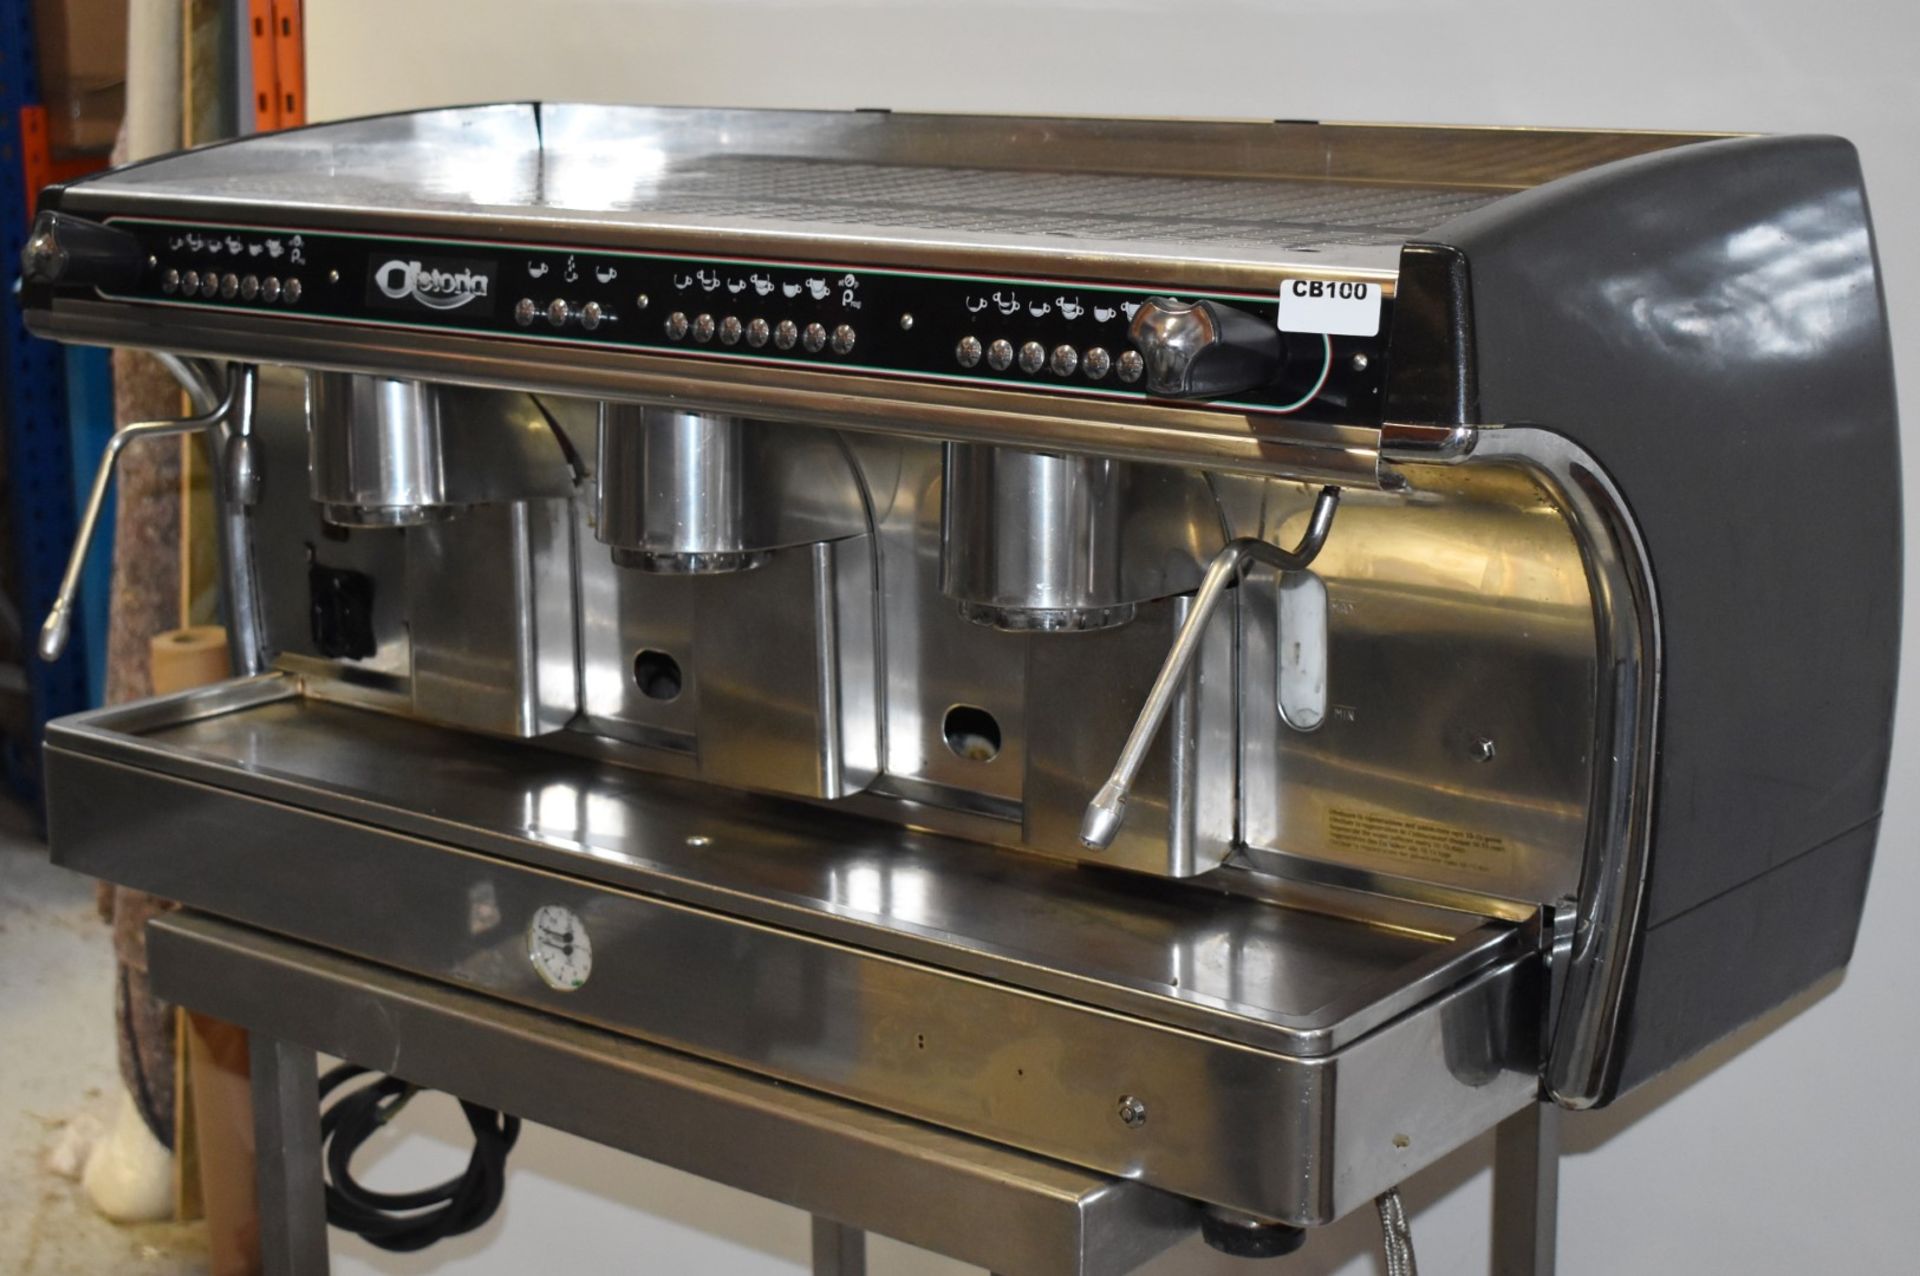 1 x Magrini 3 Group Coffee Espresso Machine With Stainless Steel and Black Finish - H47 x W106 x D57 - Image 4 of 9